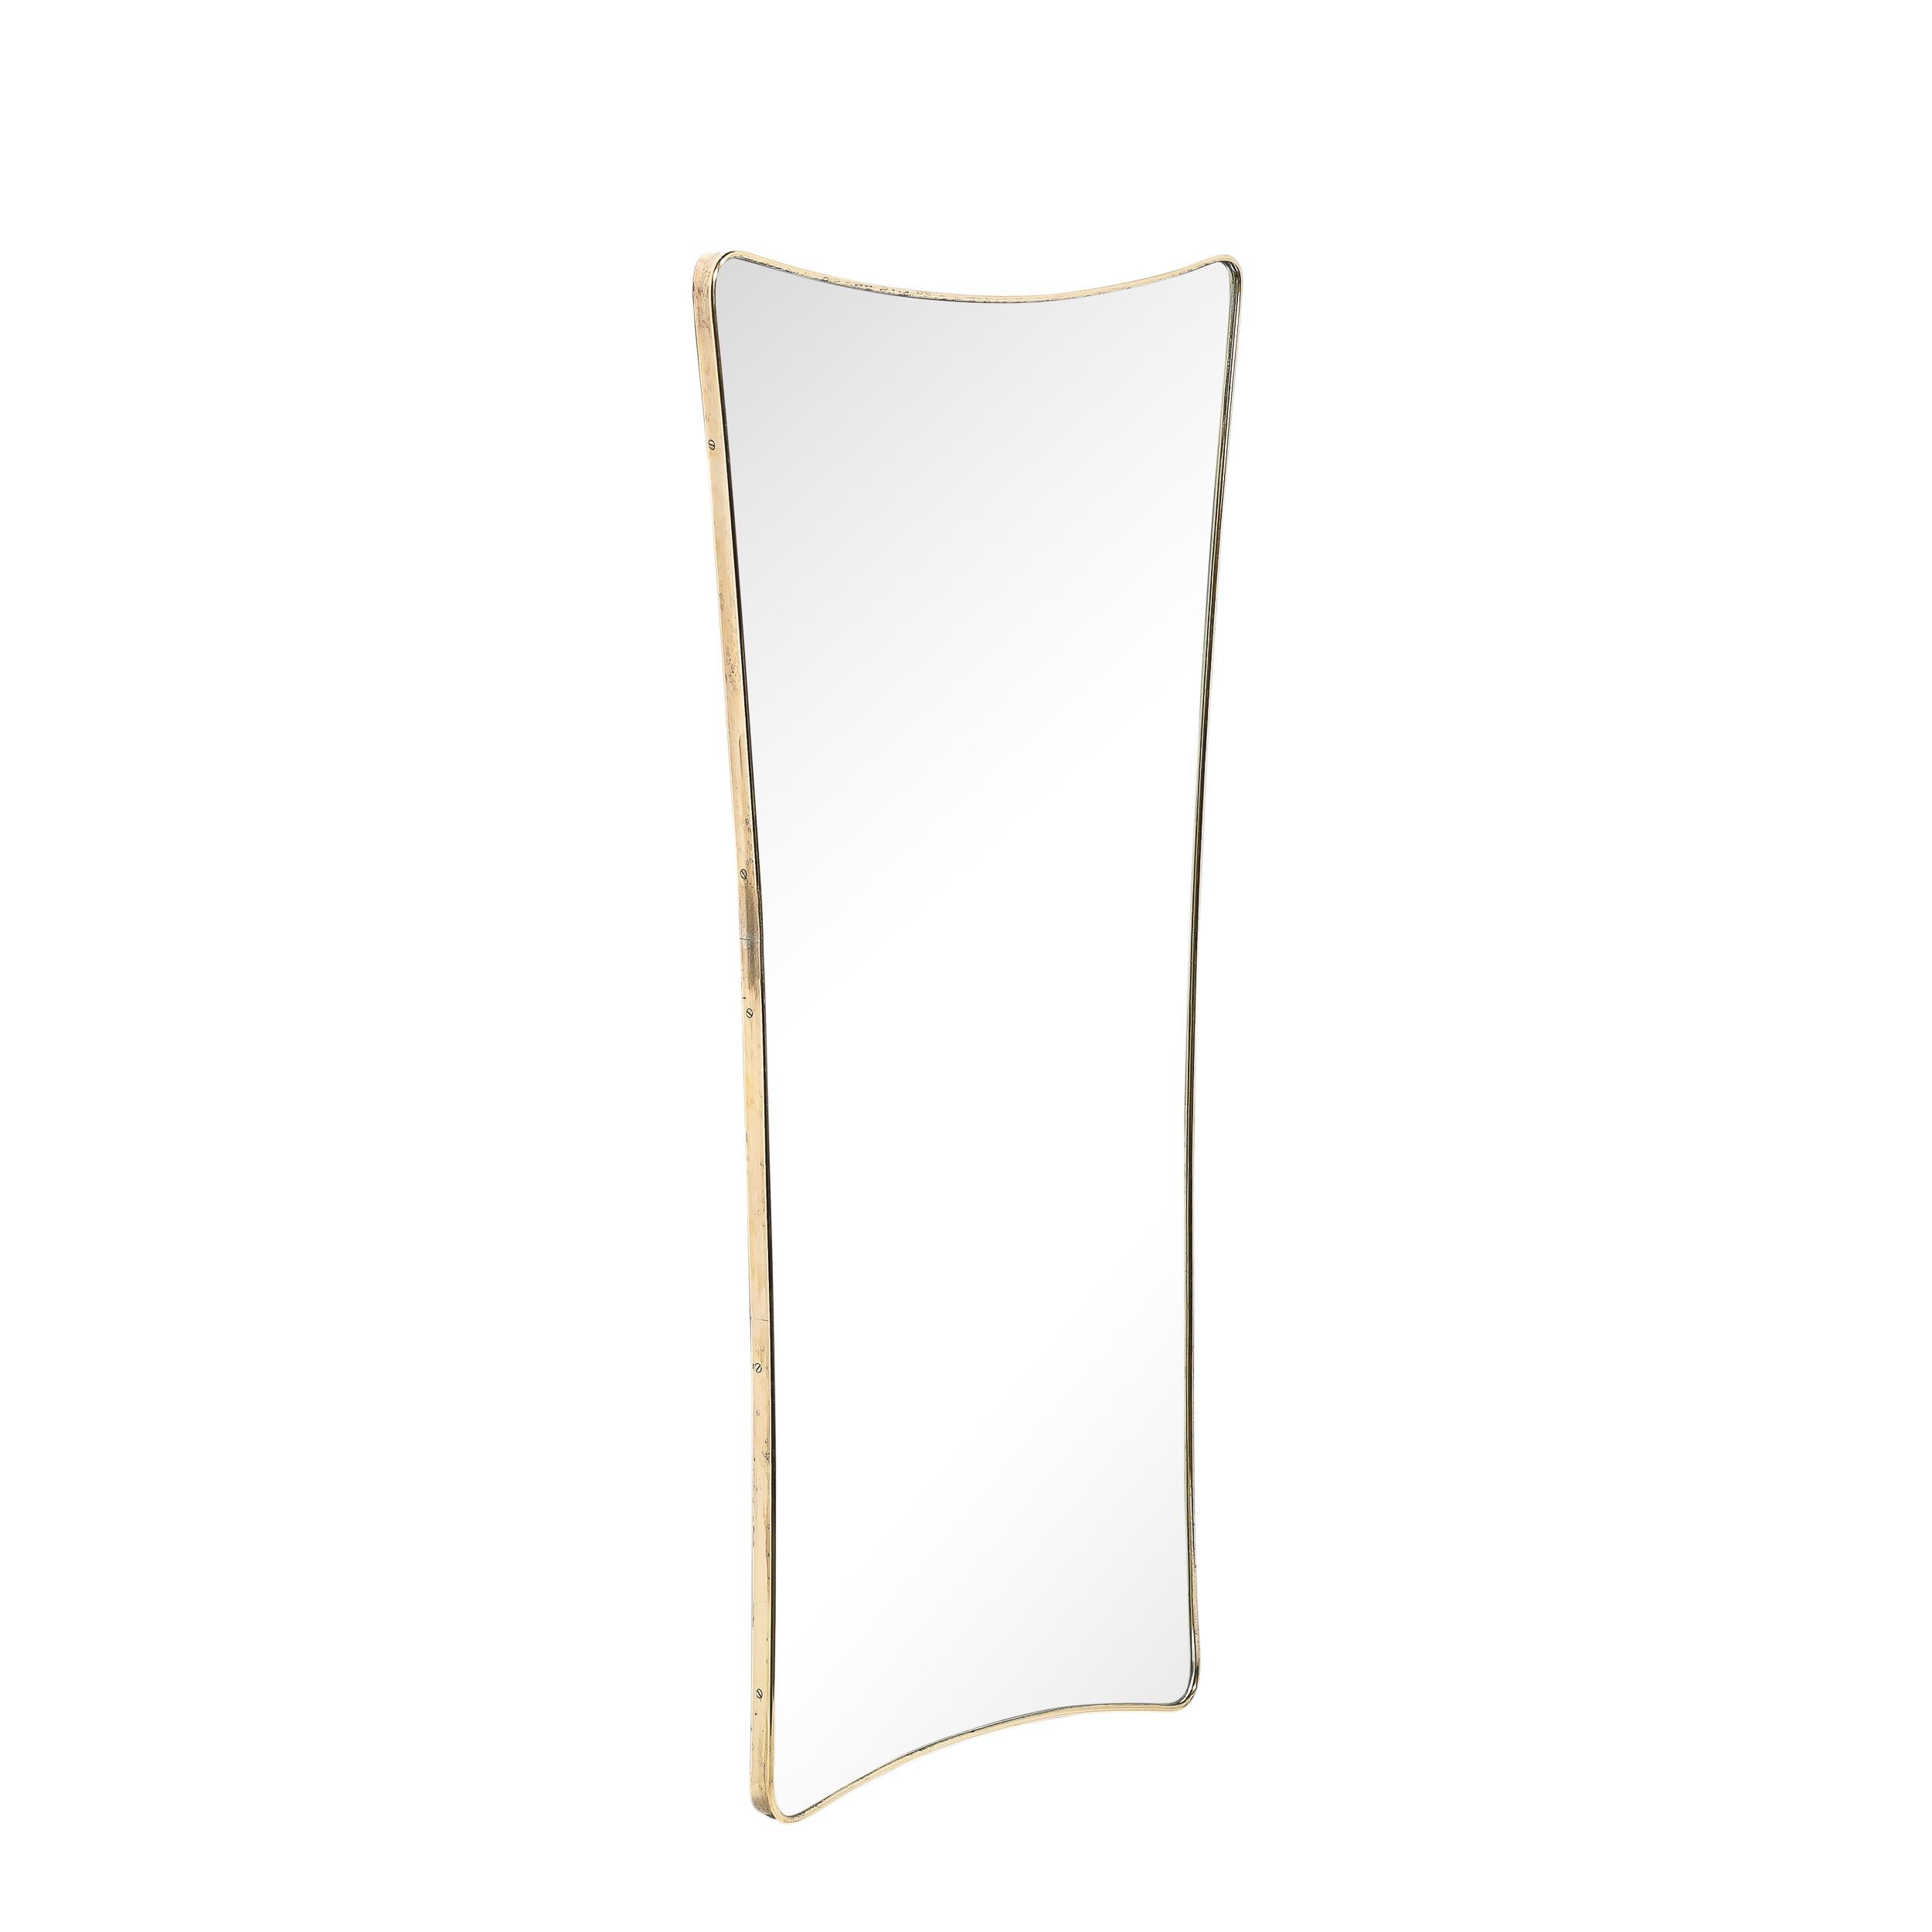 This dynamic and striking Mid-Century Modernist Tapered Atomic Form Brass Wrapped Mirror originates from Italy, Circa 1960. Features a distinct tapered form composed of swooping curves and carefully rounded corners, the edge of the mirror is